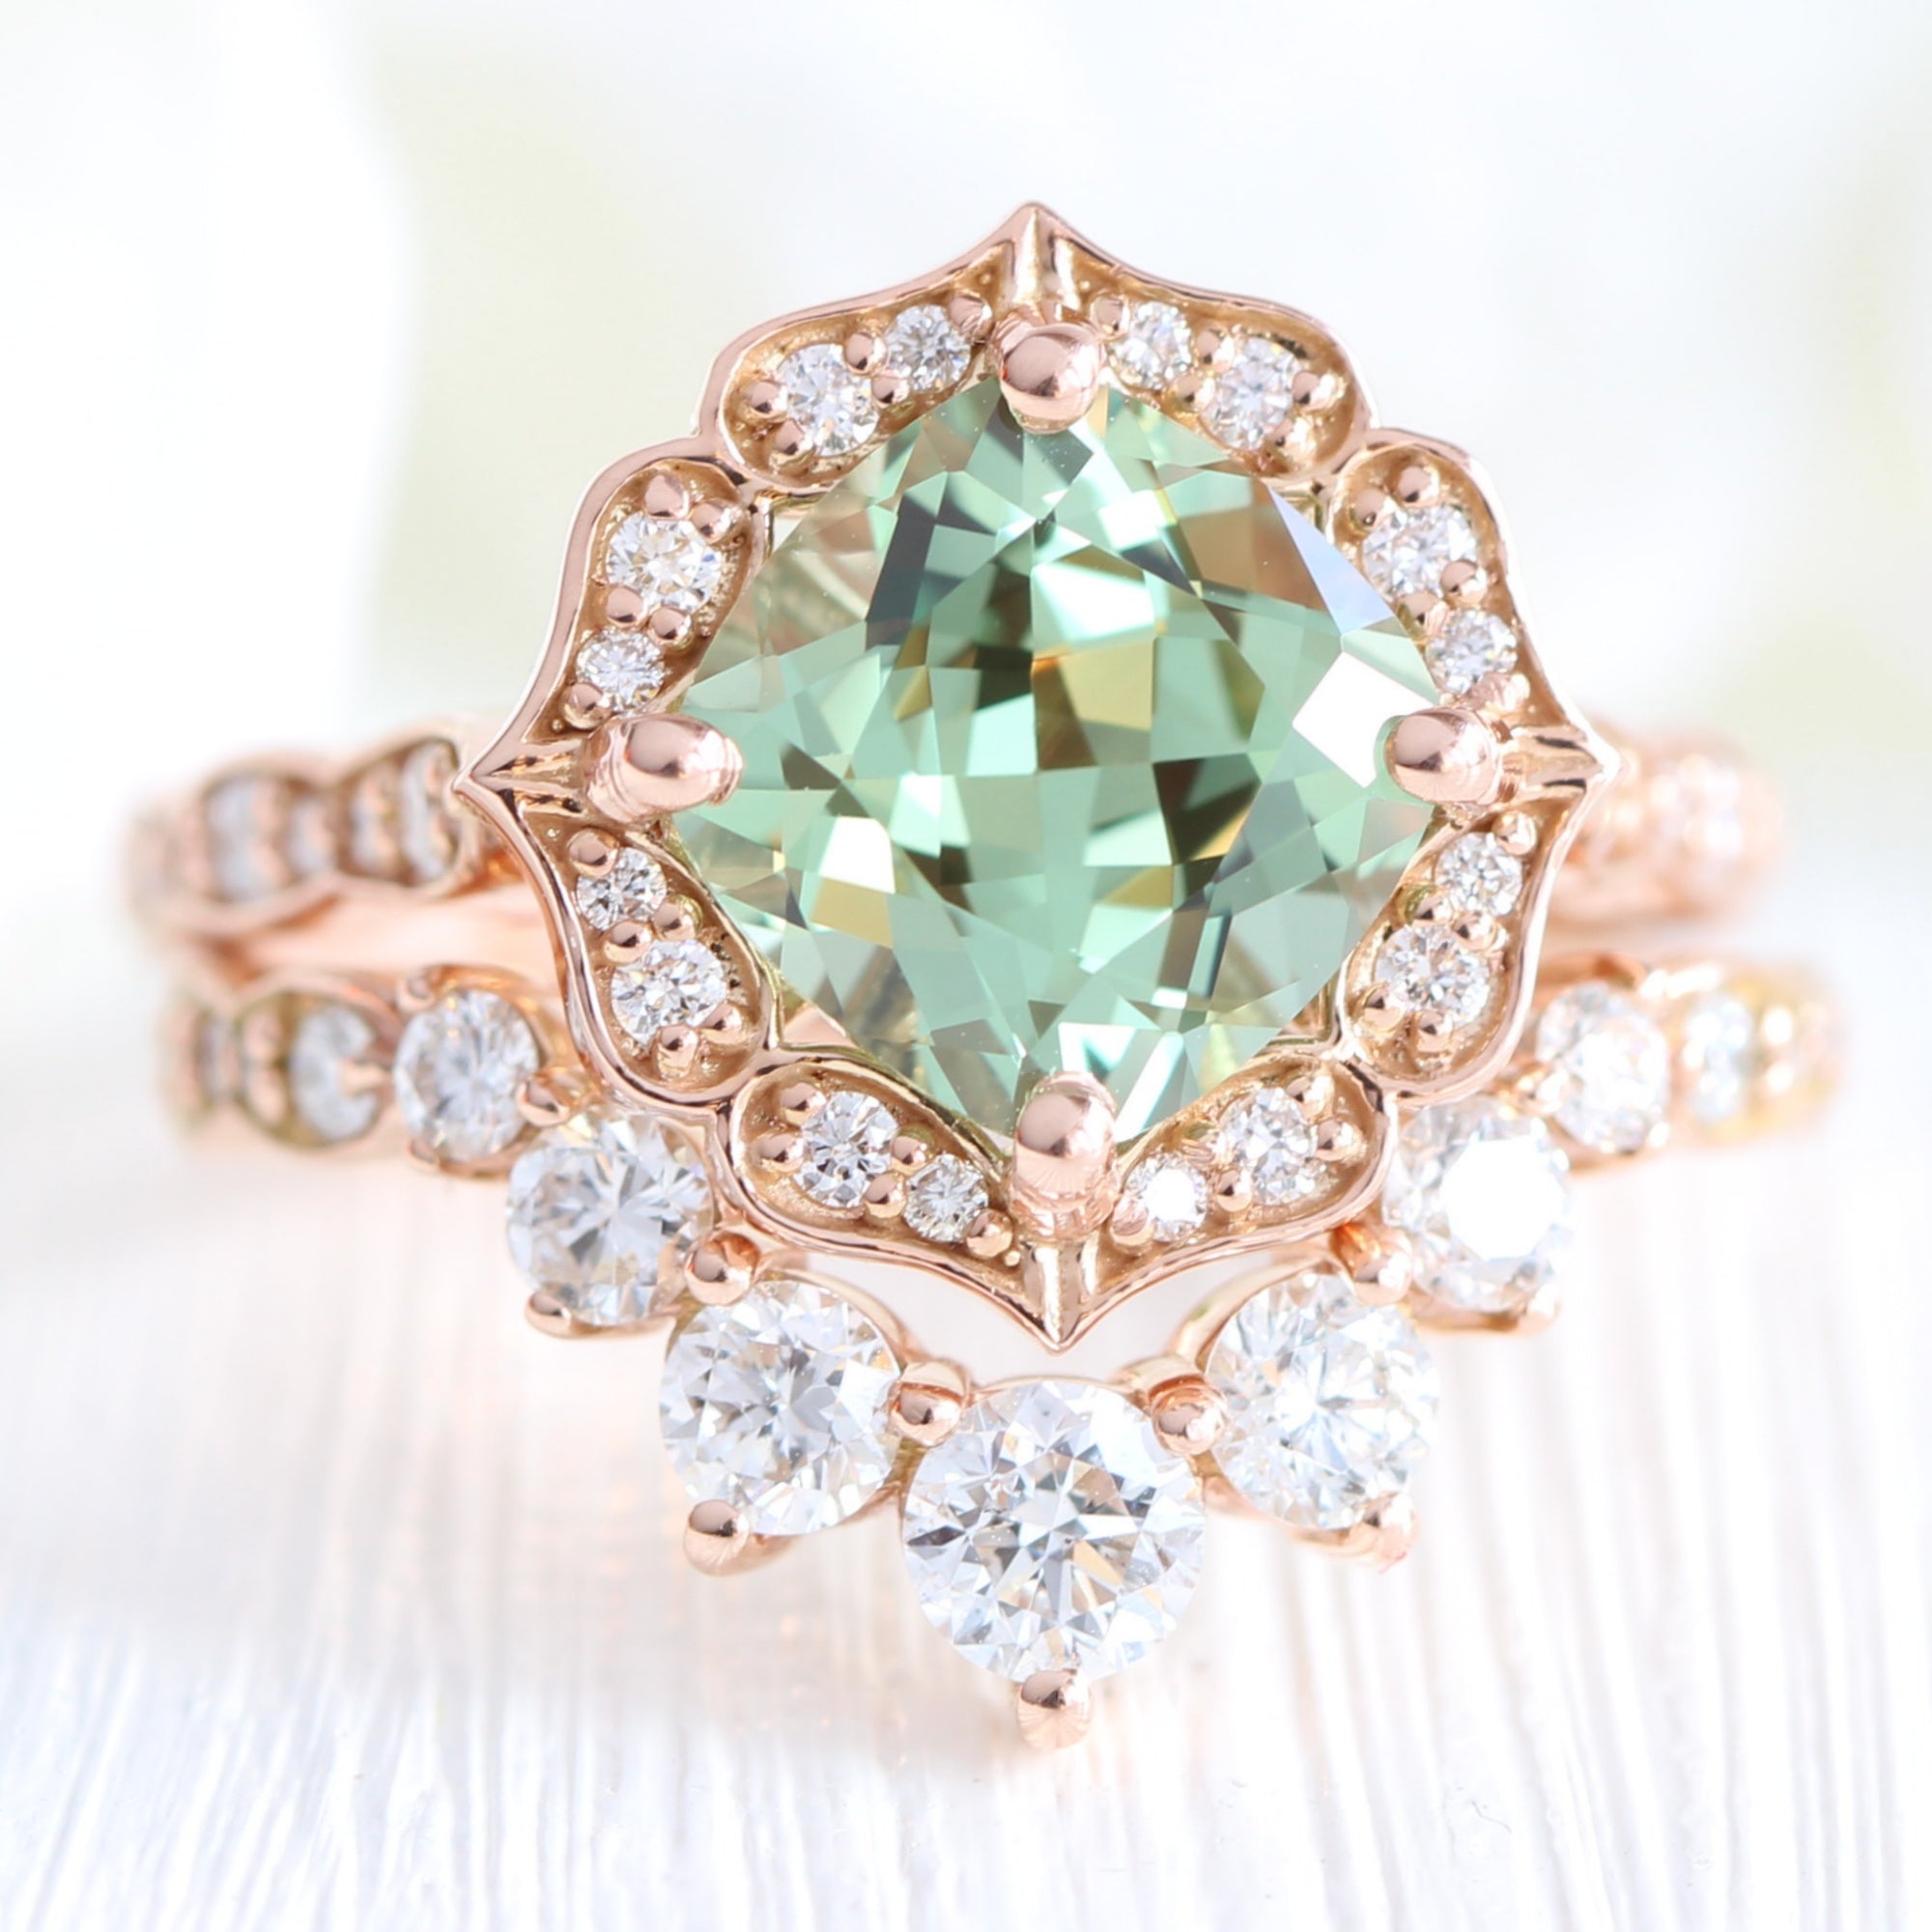 Barrow Ring - 1.15 Carat Natural Fancy Colored Diamond Ring